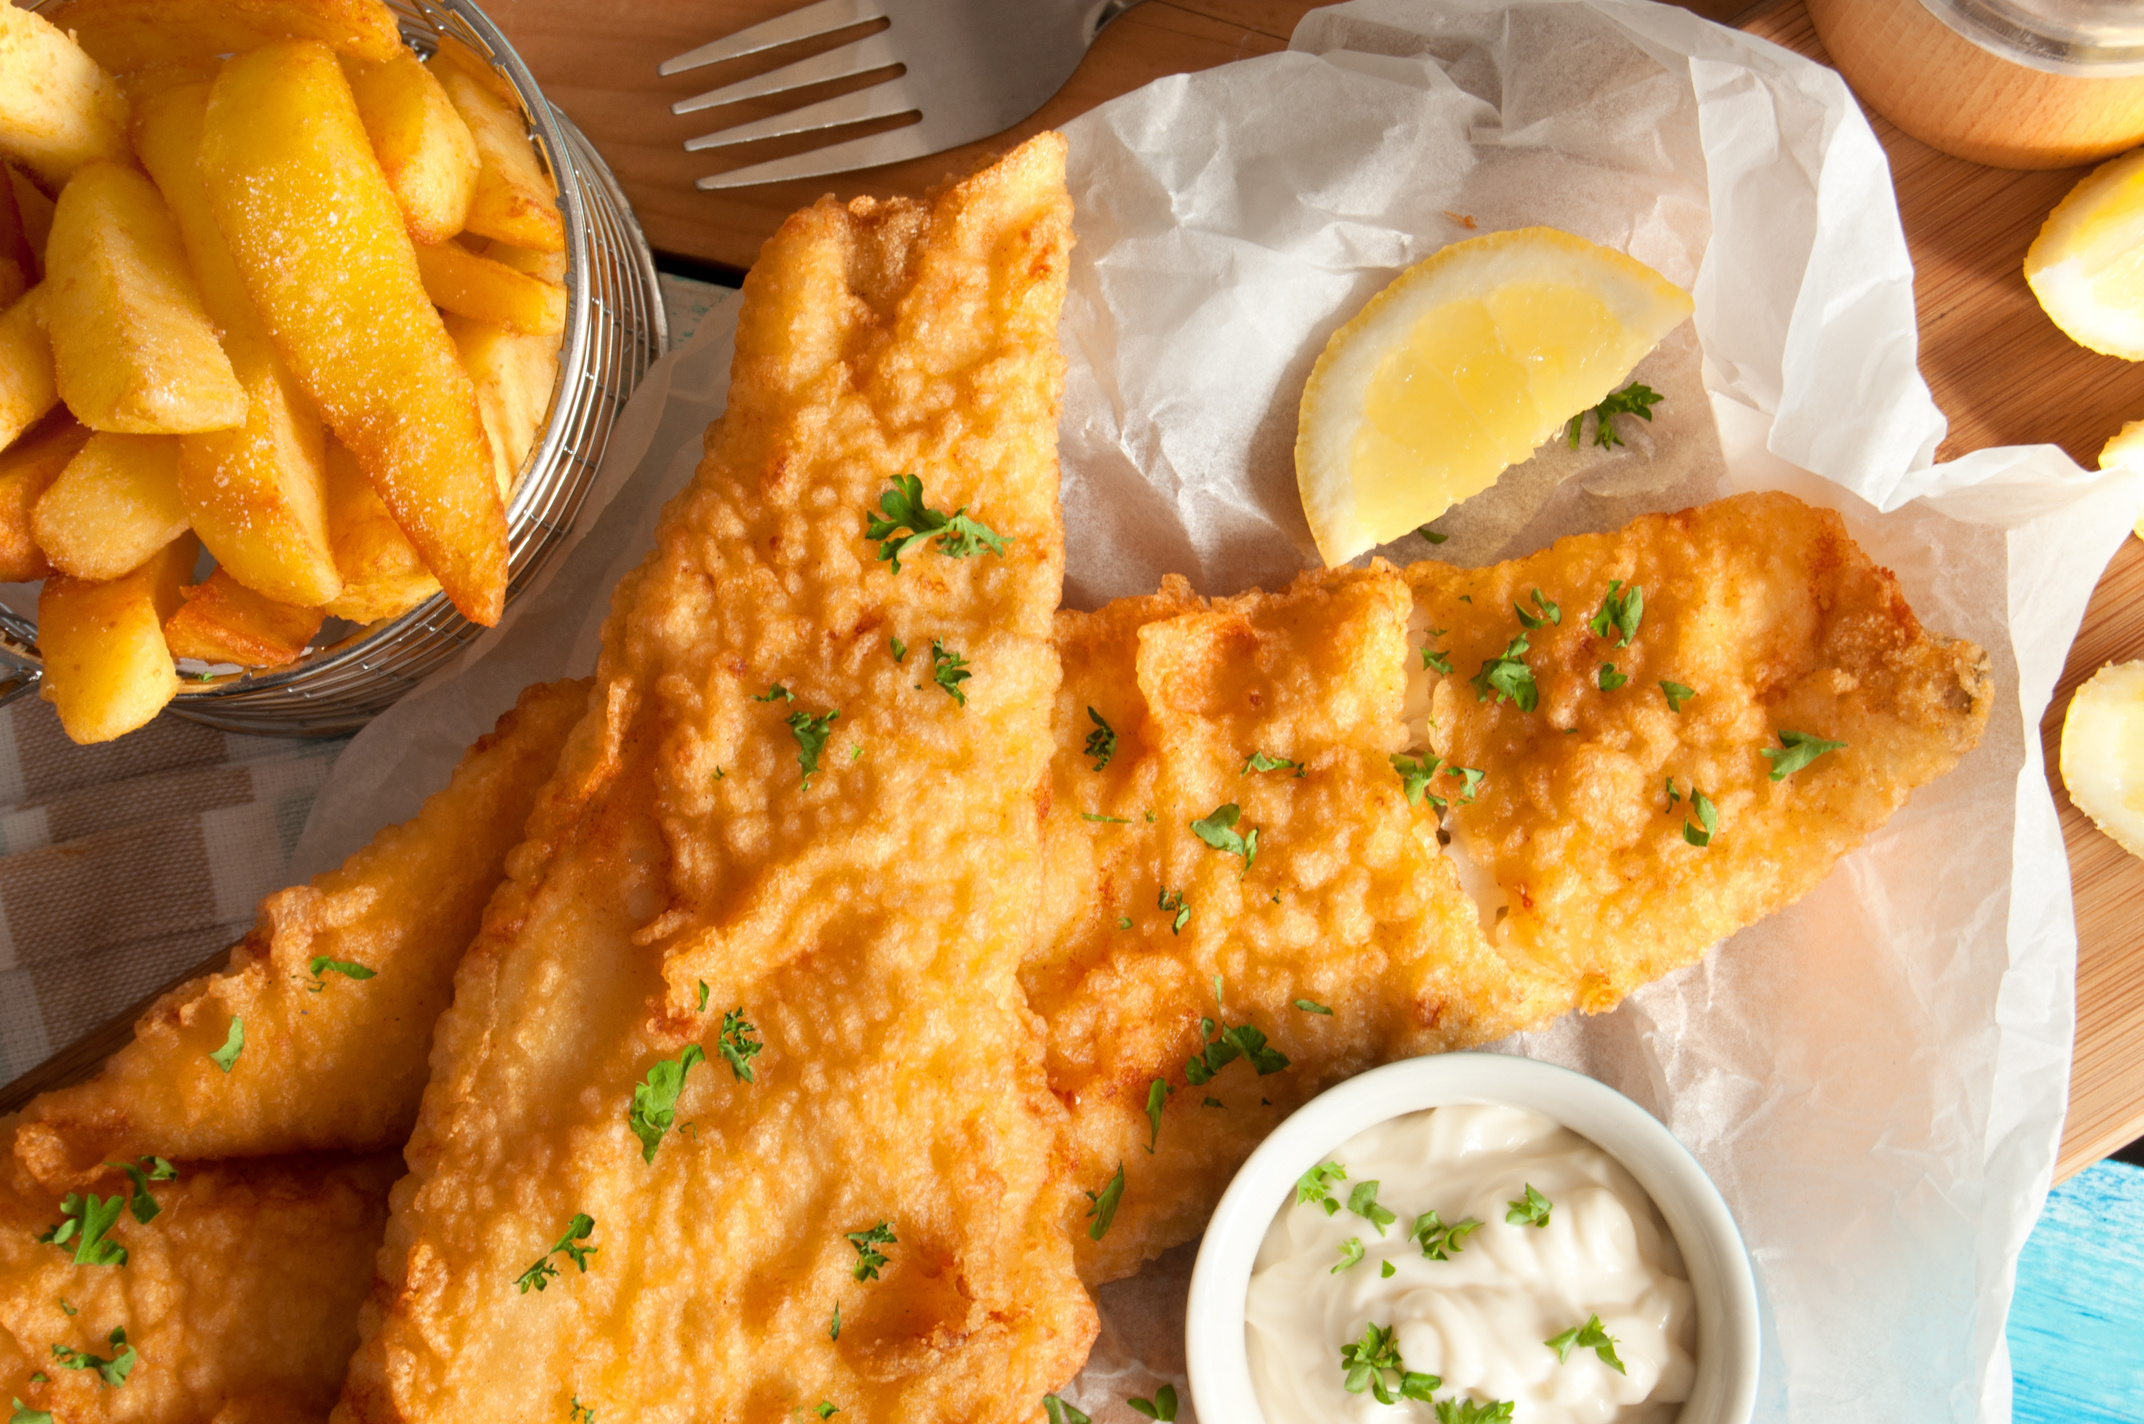 Rustic fish and chips